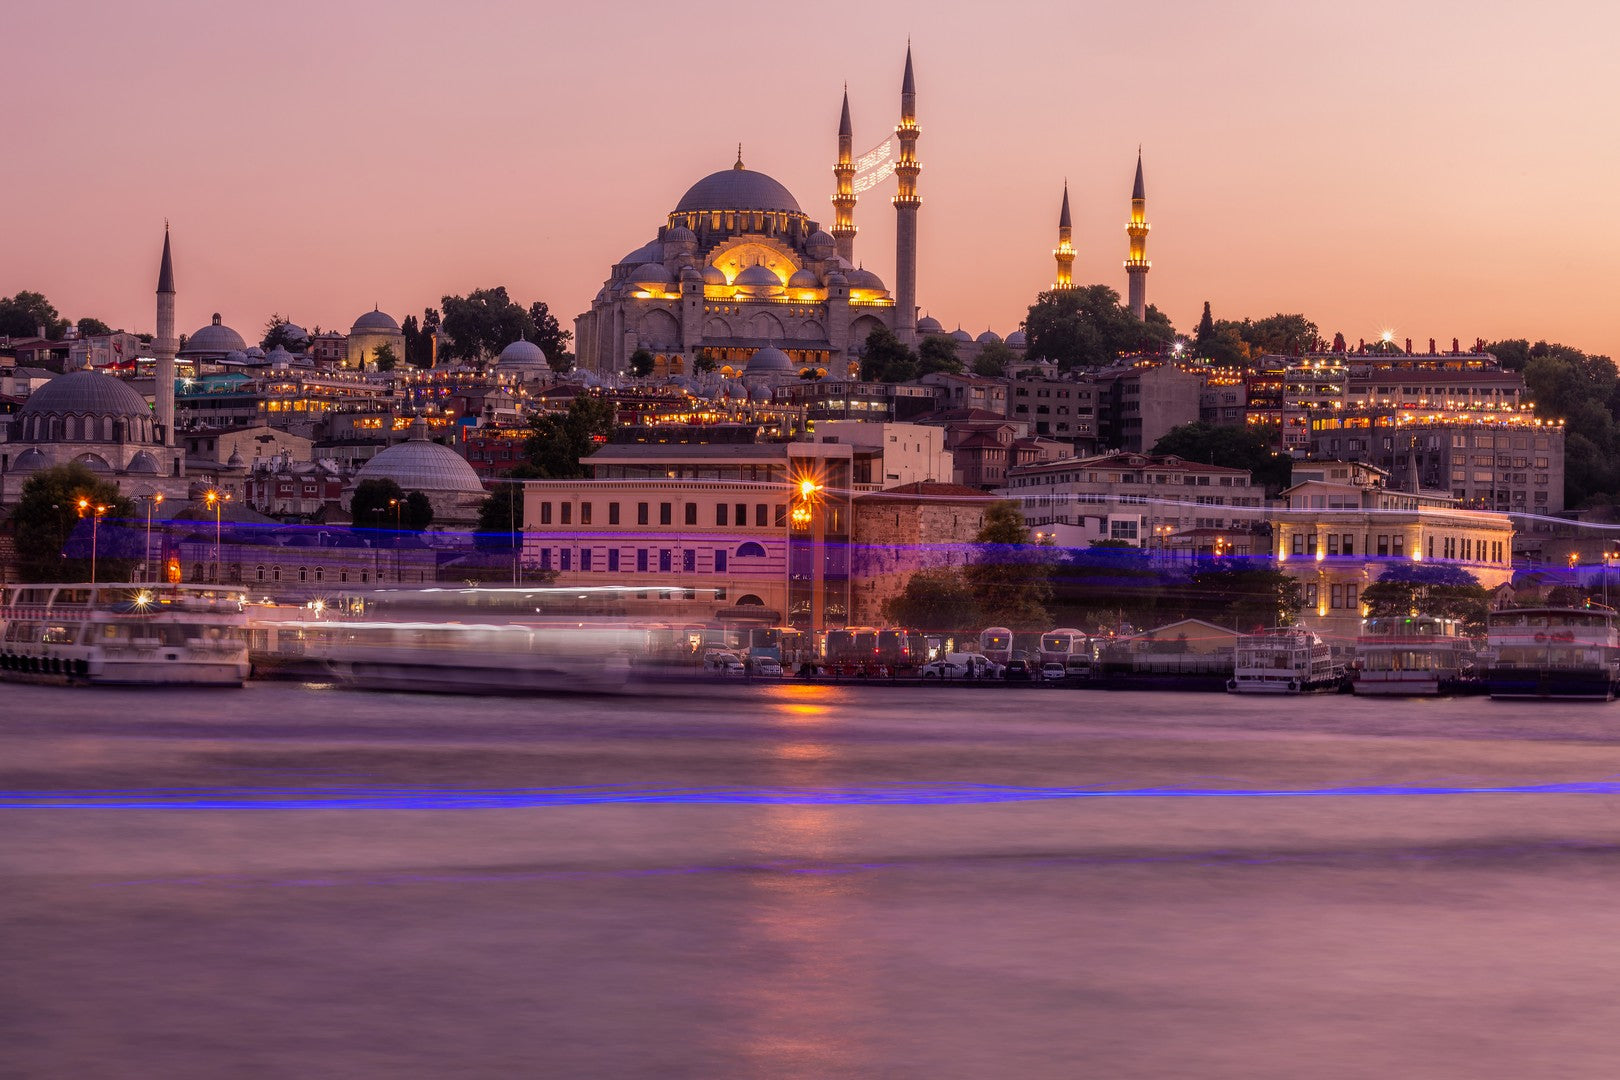 TAKE THE BEAUTY OF ISTANBUL TO YOUR HOME WITH ILLUMINATED TABLES!